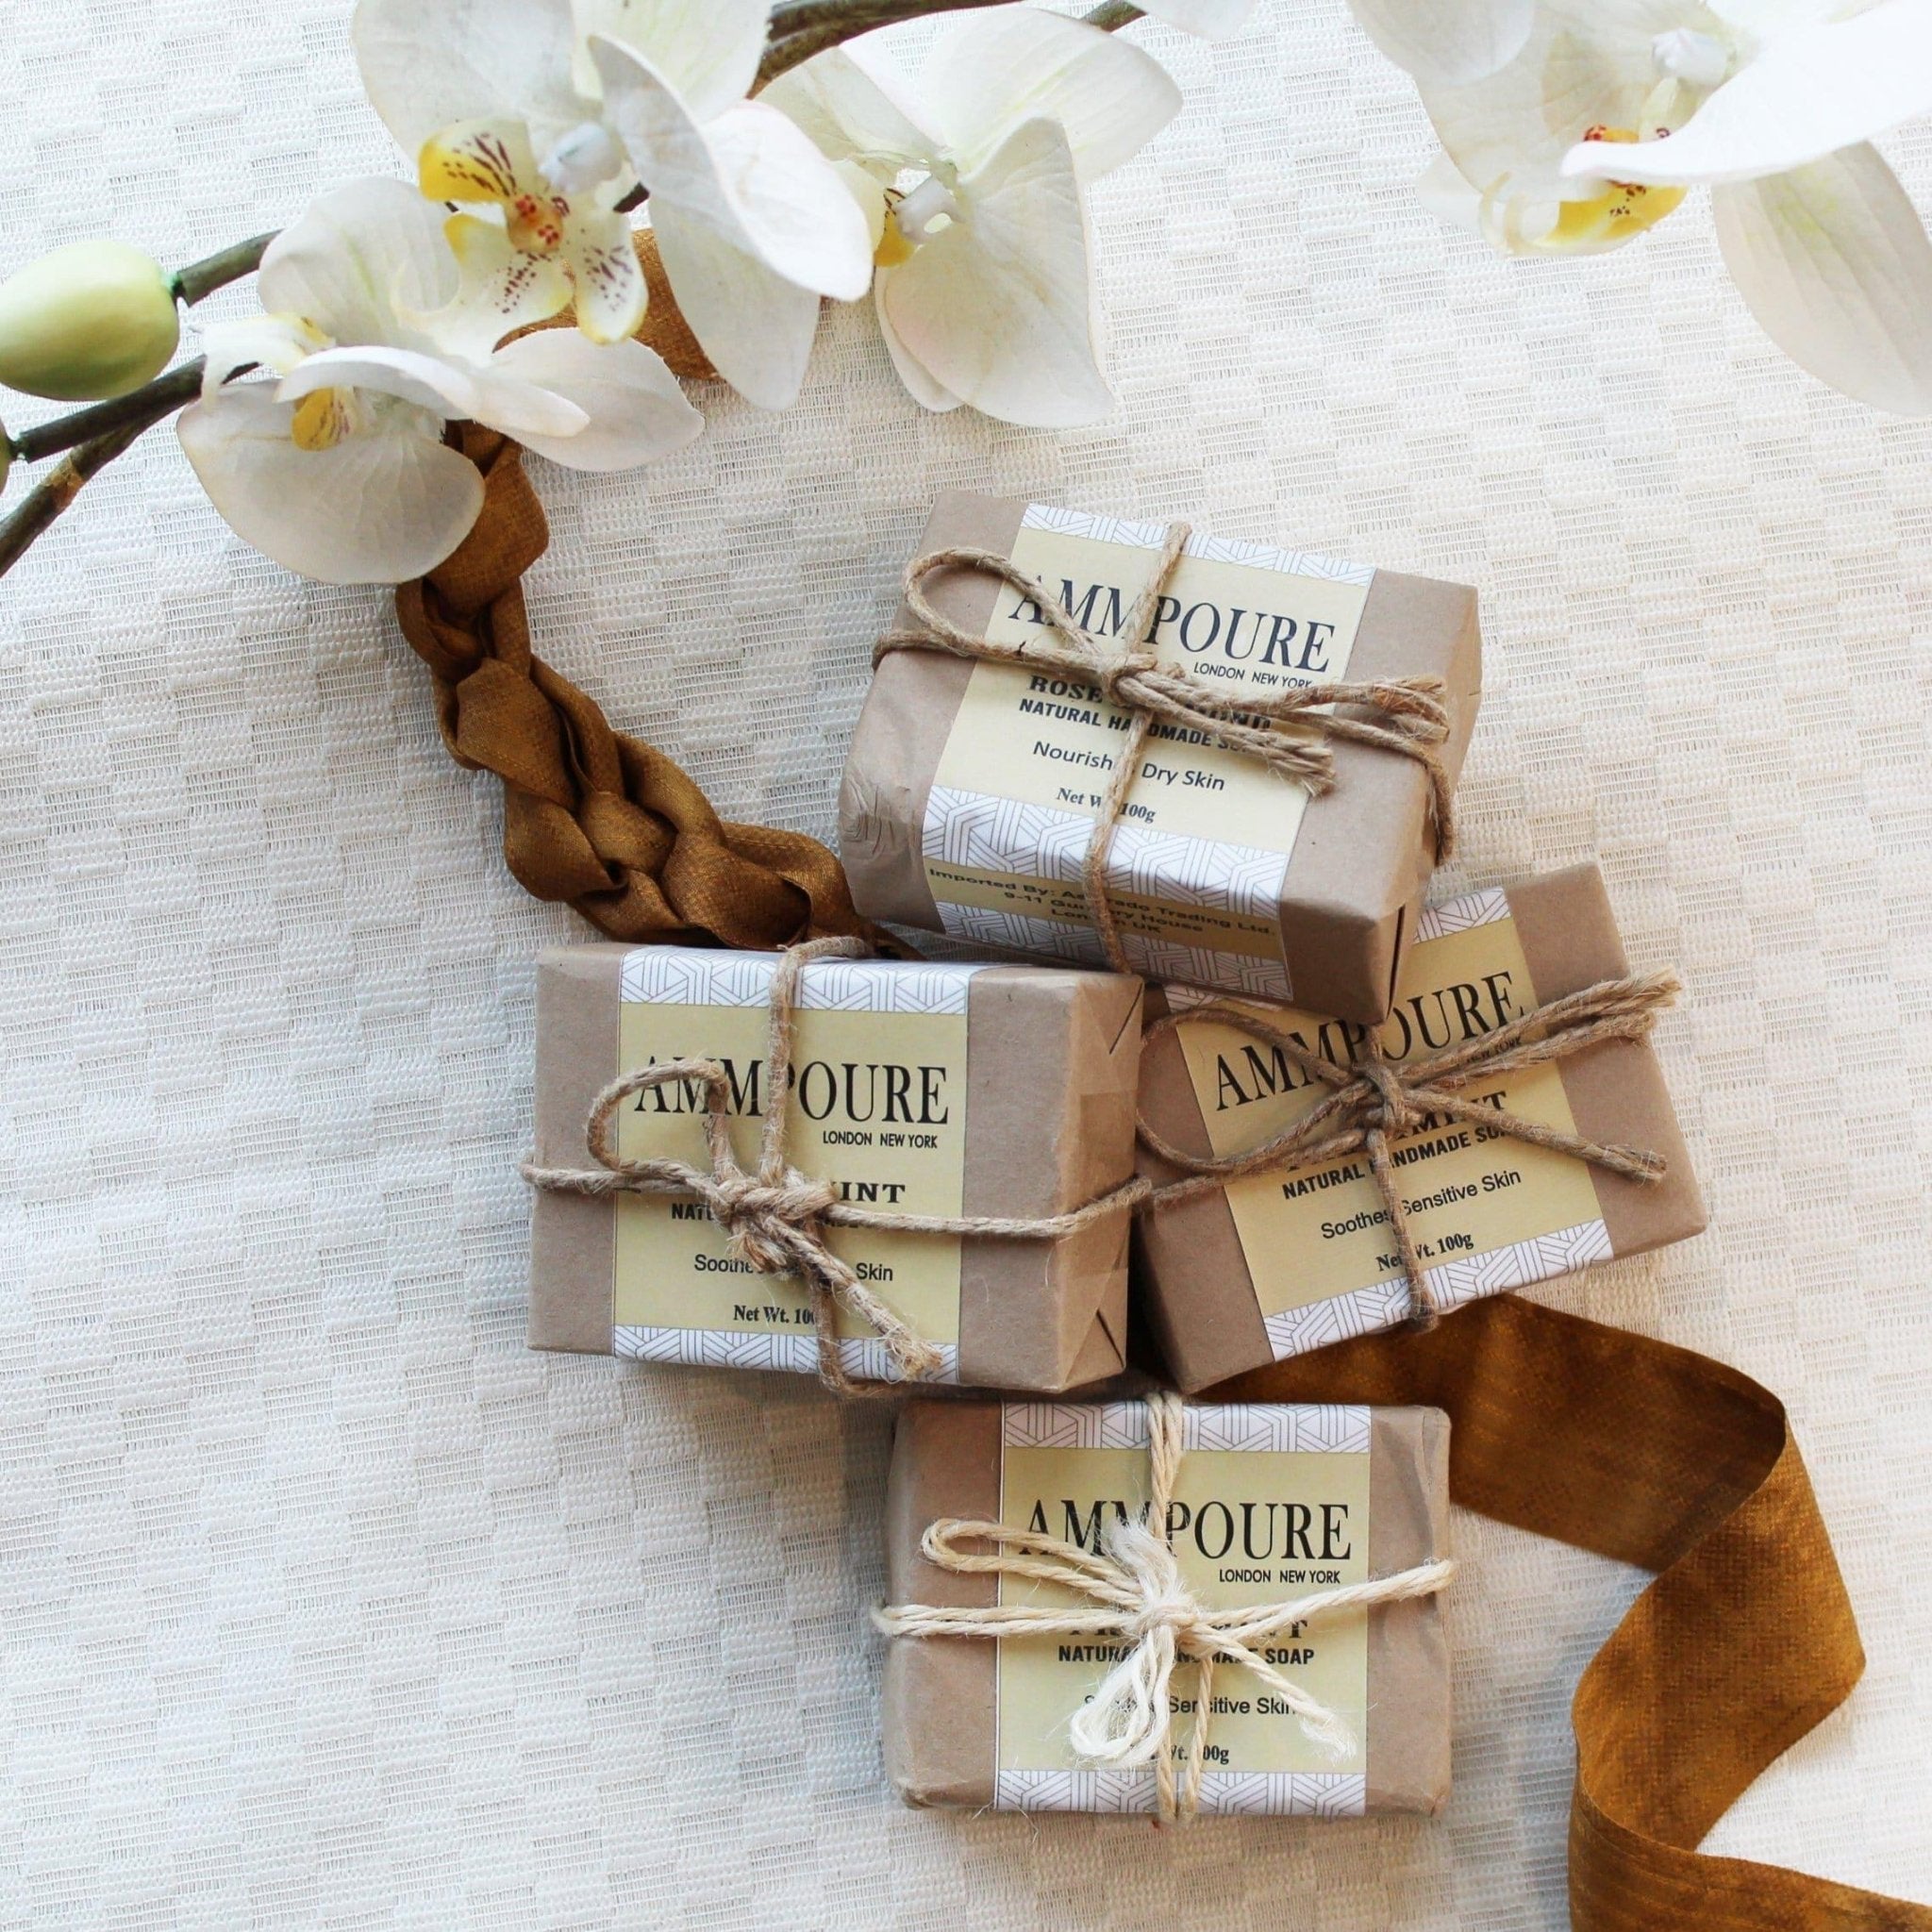 Natural Organic Soaps Set Of 4 UK - Ammpoure Wellbeing